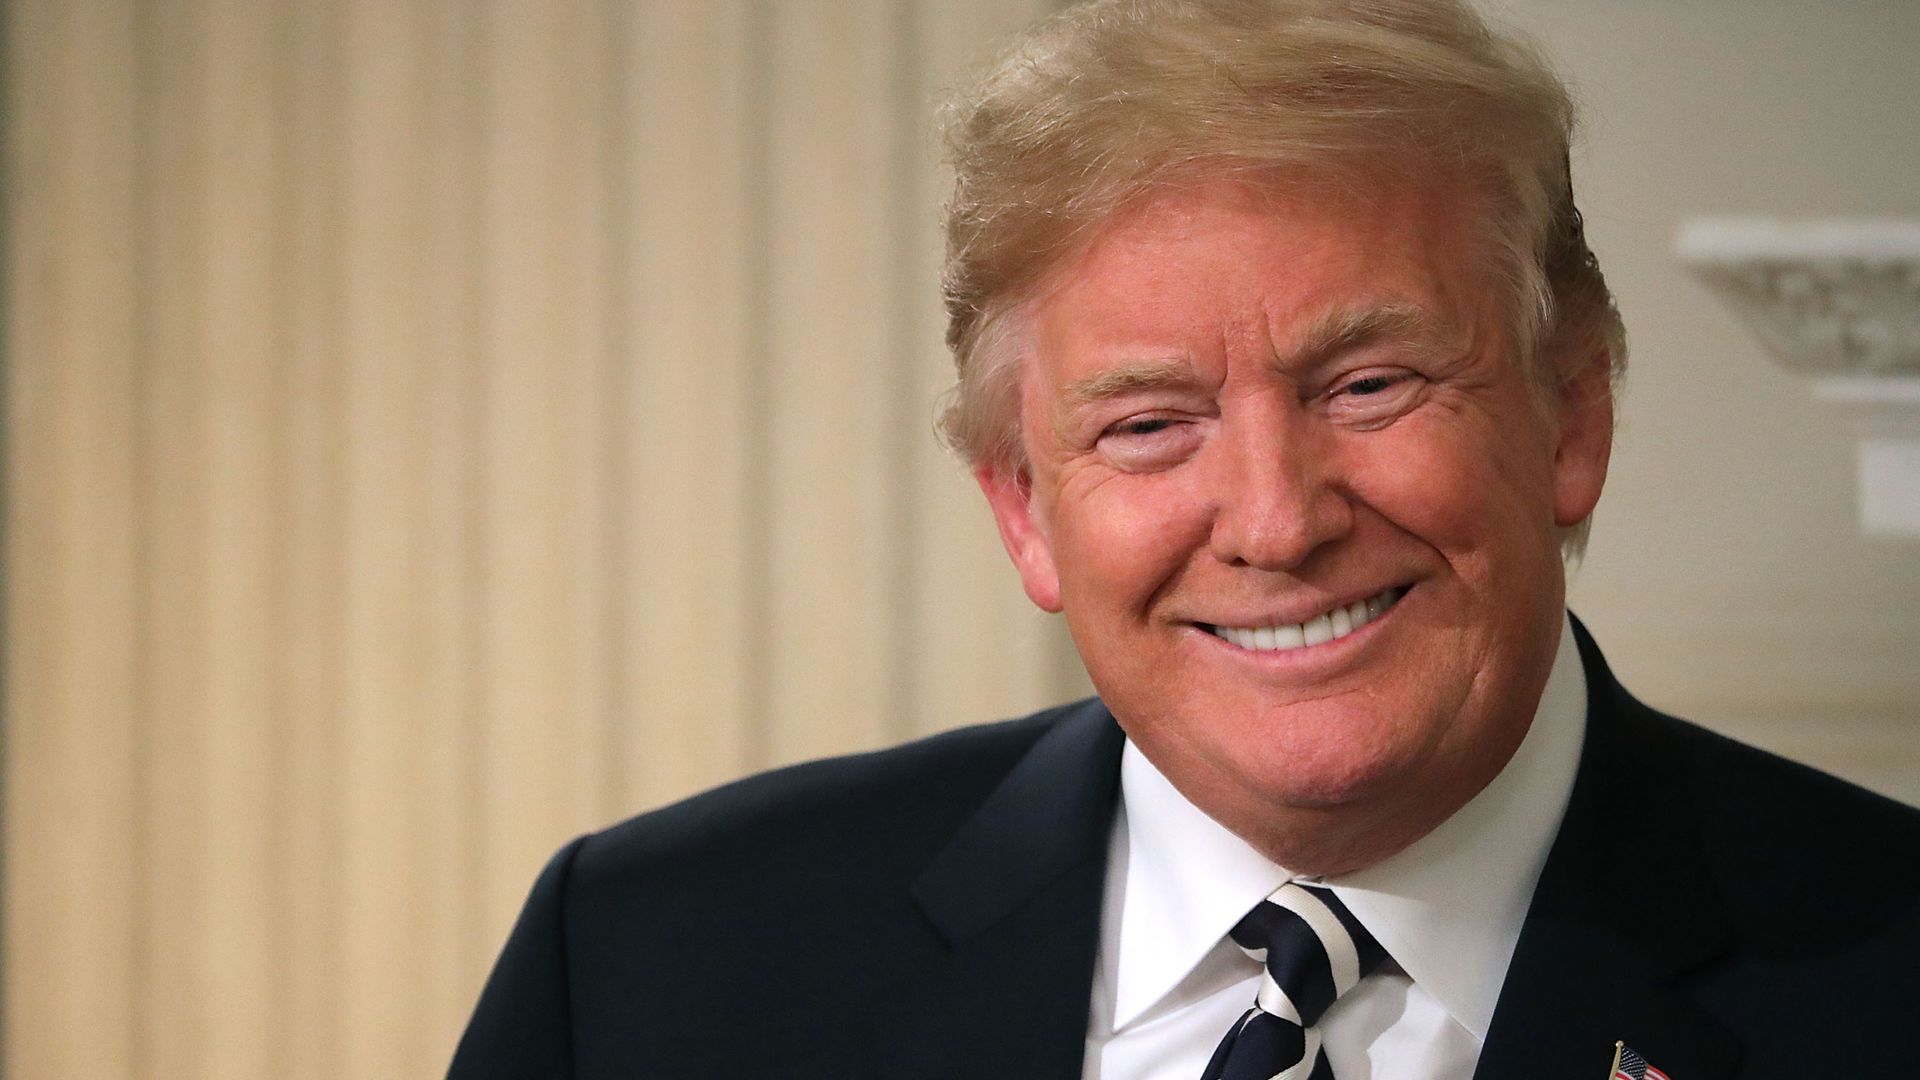 Trump smiles in a black suit before a white background.